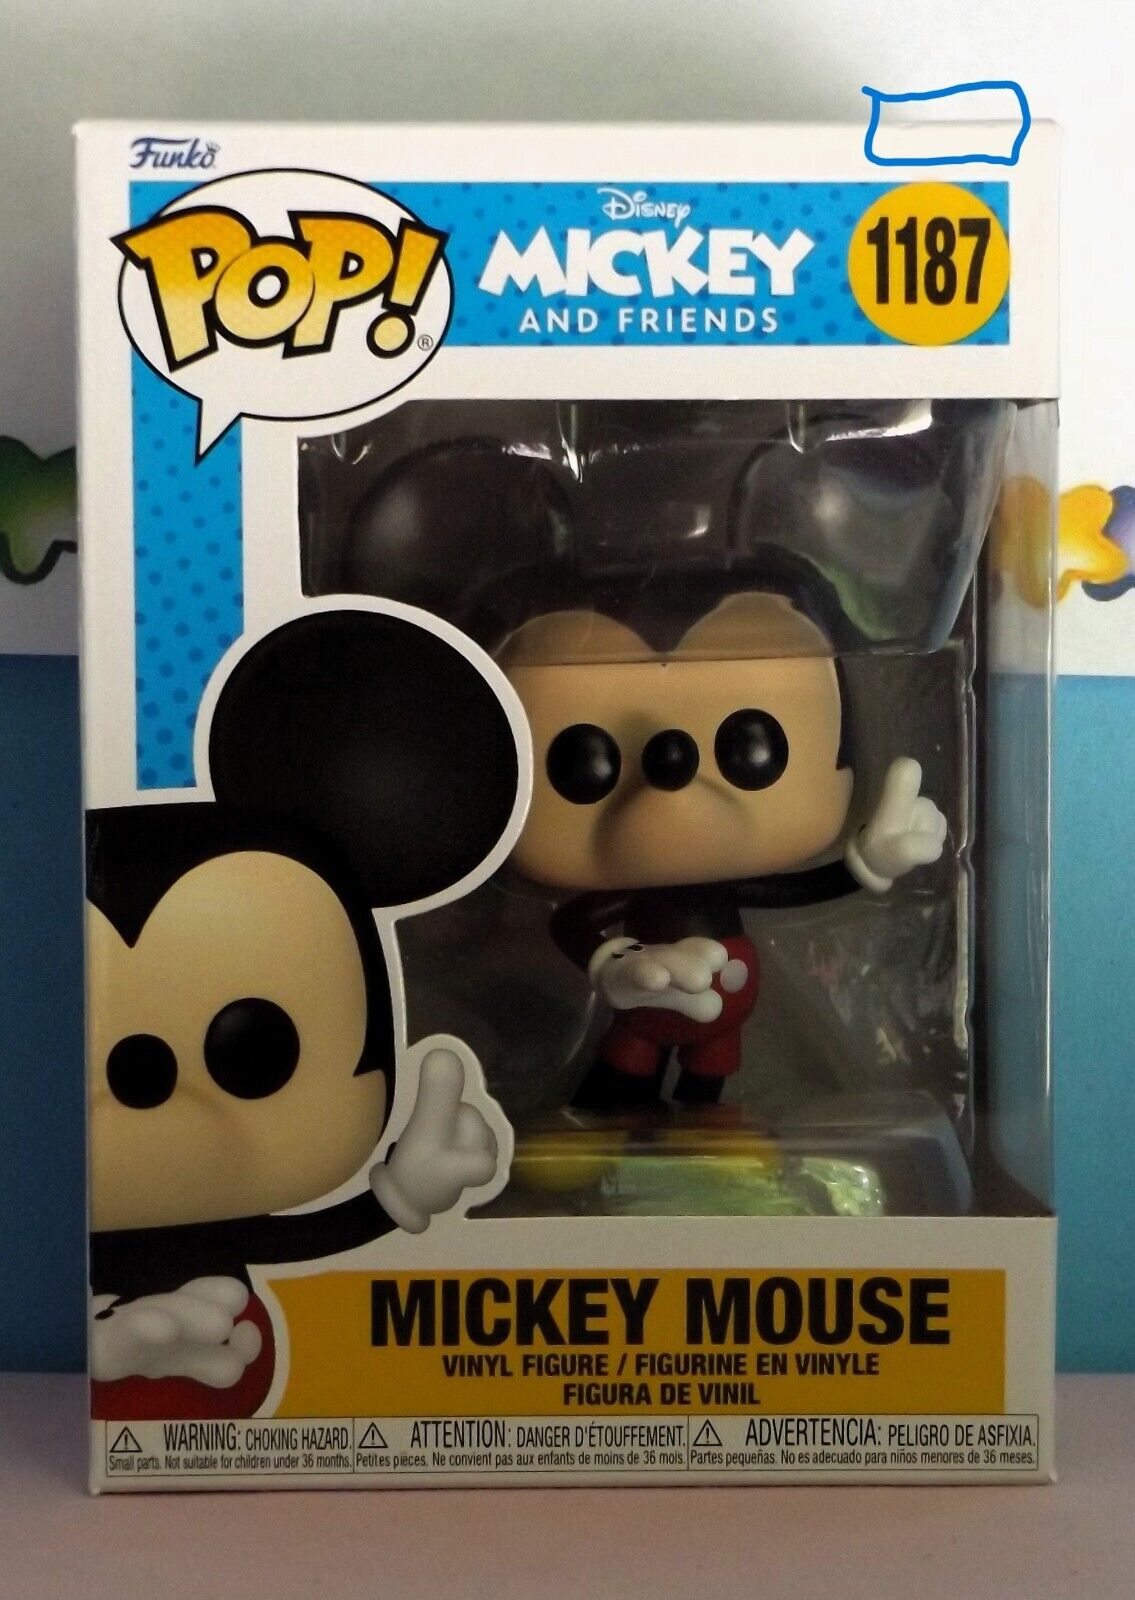 BRAND NEW UNOPEN MICKEY AND FRIENDS #1187 MICKEY MOUSE READY TO SHIP